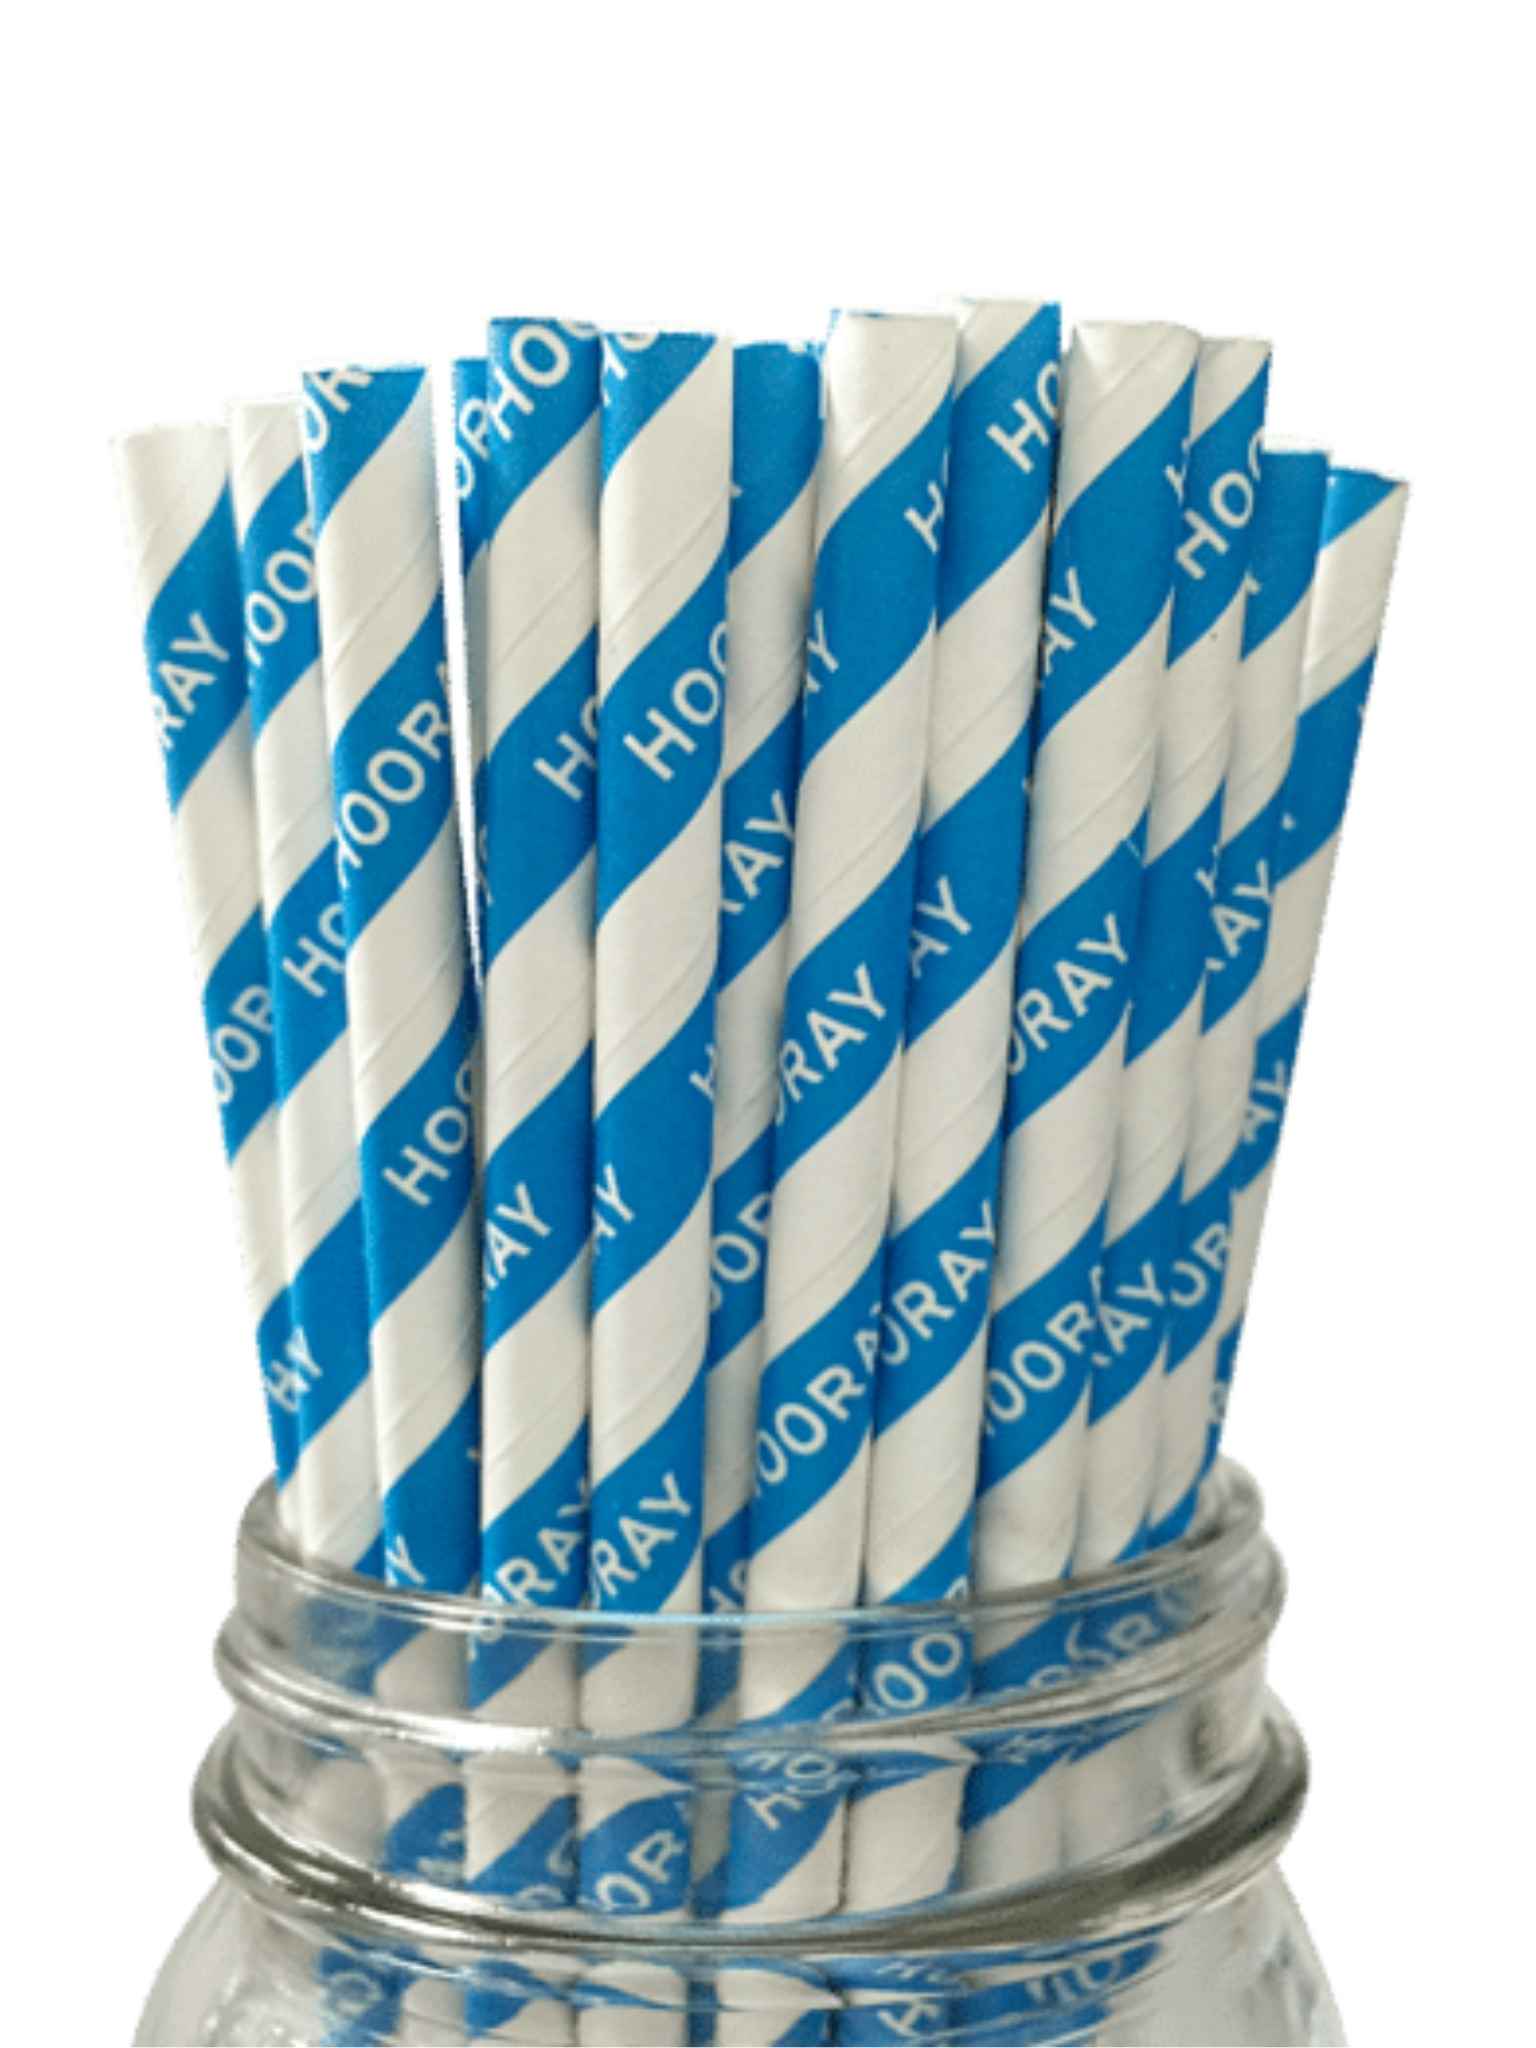 paper straw personalized message blue and white printing